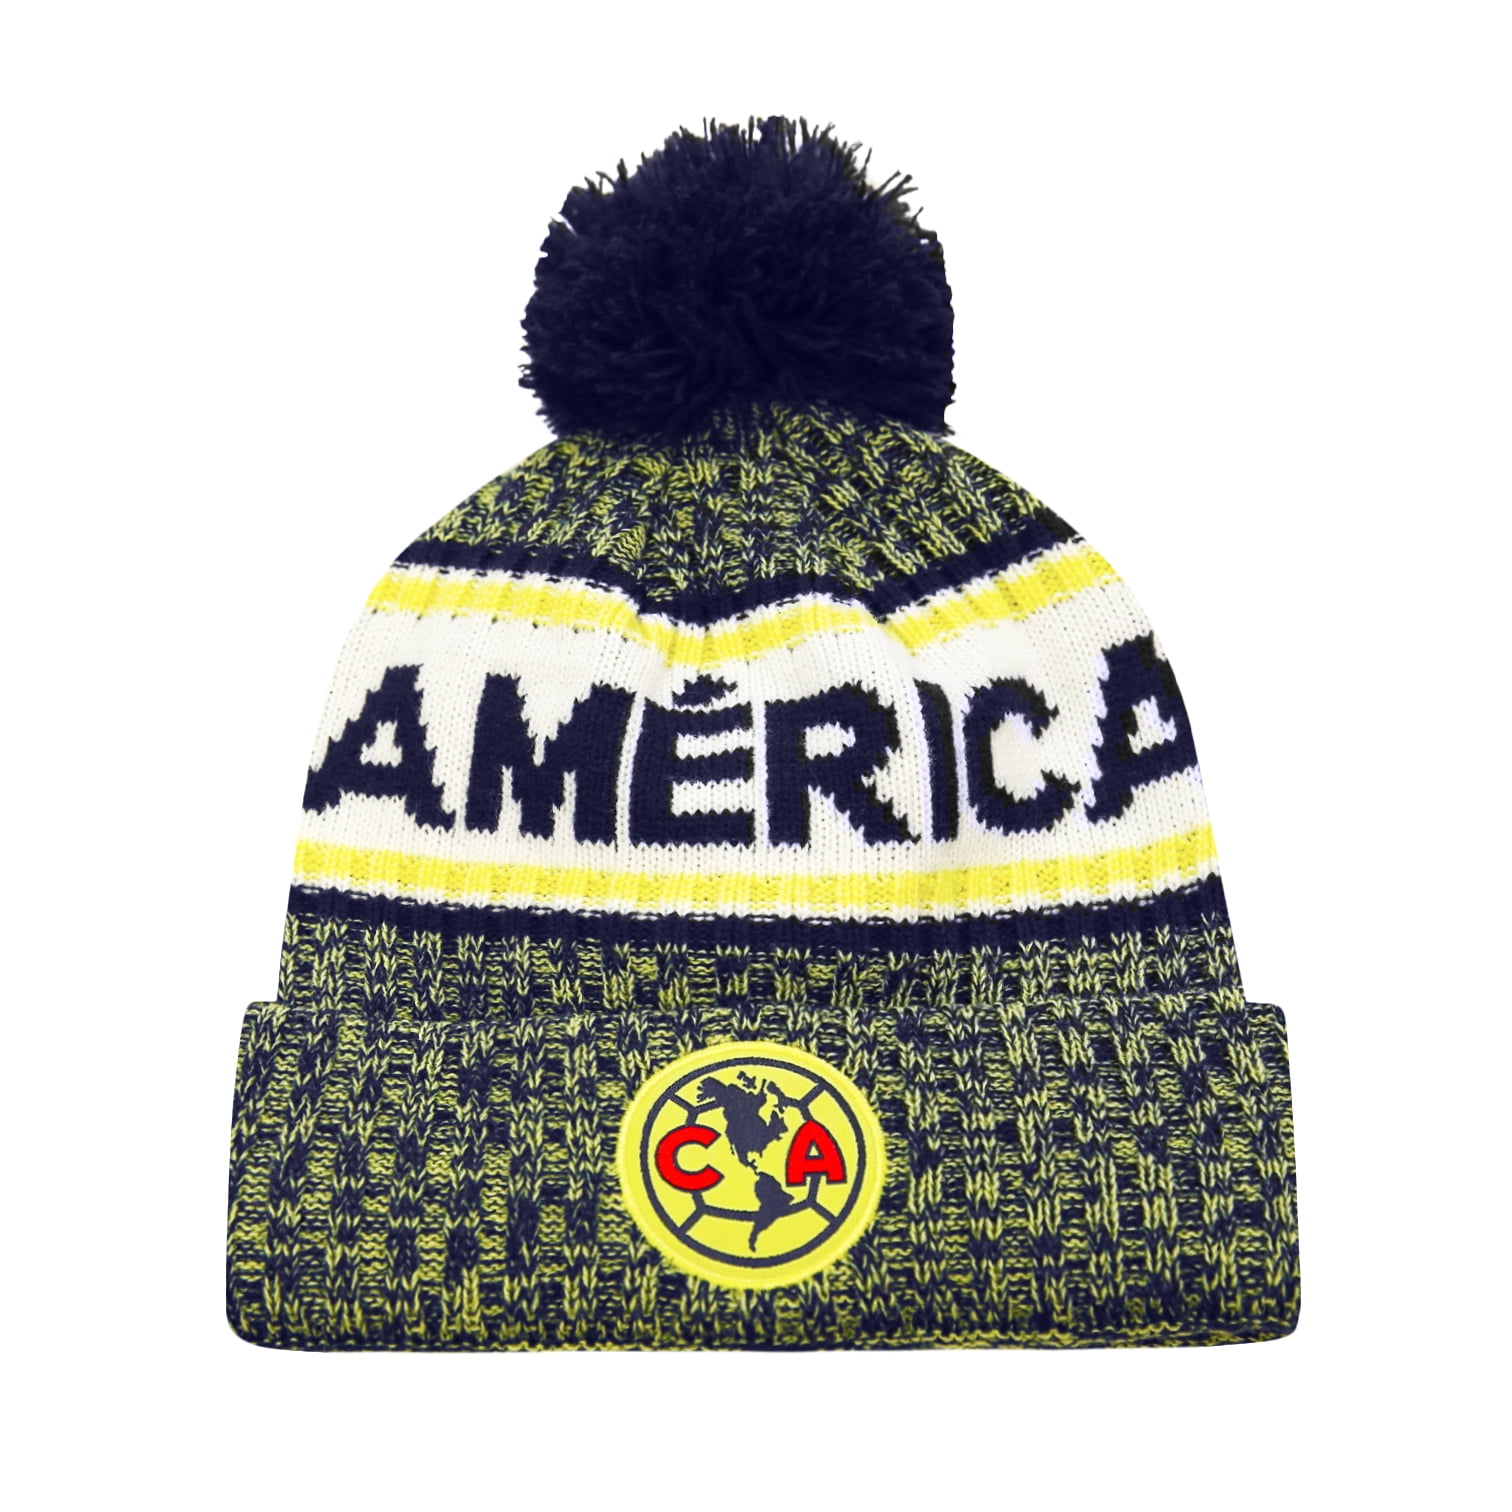 Team Colors Bracelet amer007 Club America Aguilas Mexico Soccer Set Beanie Skull Cap Hat and Scarf Reversible 